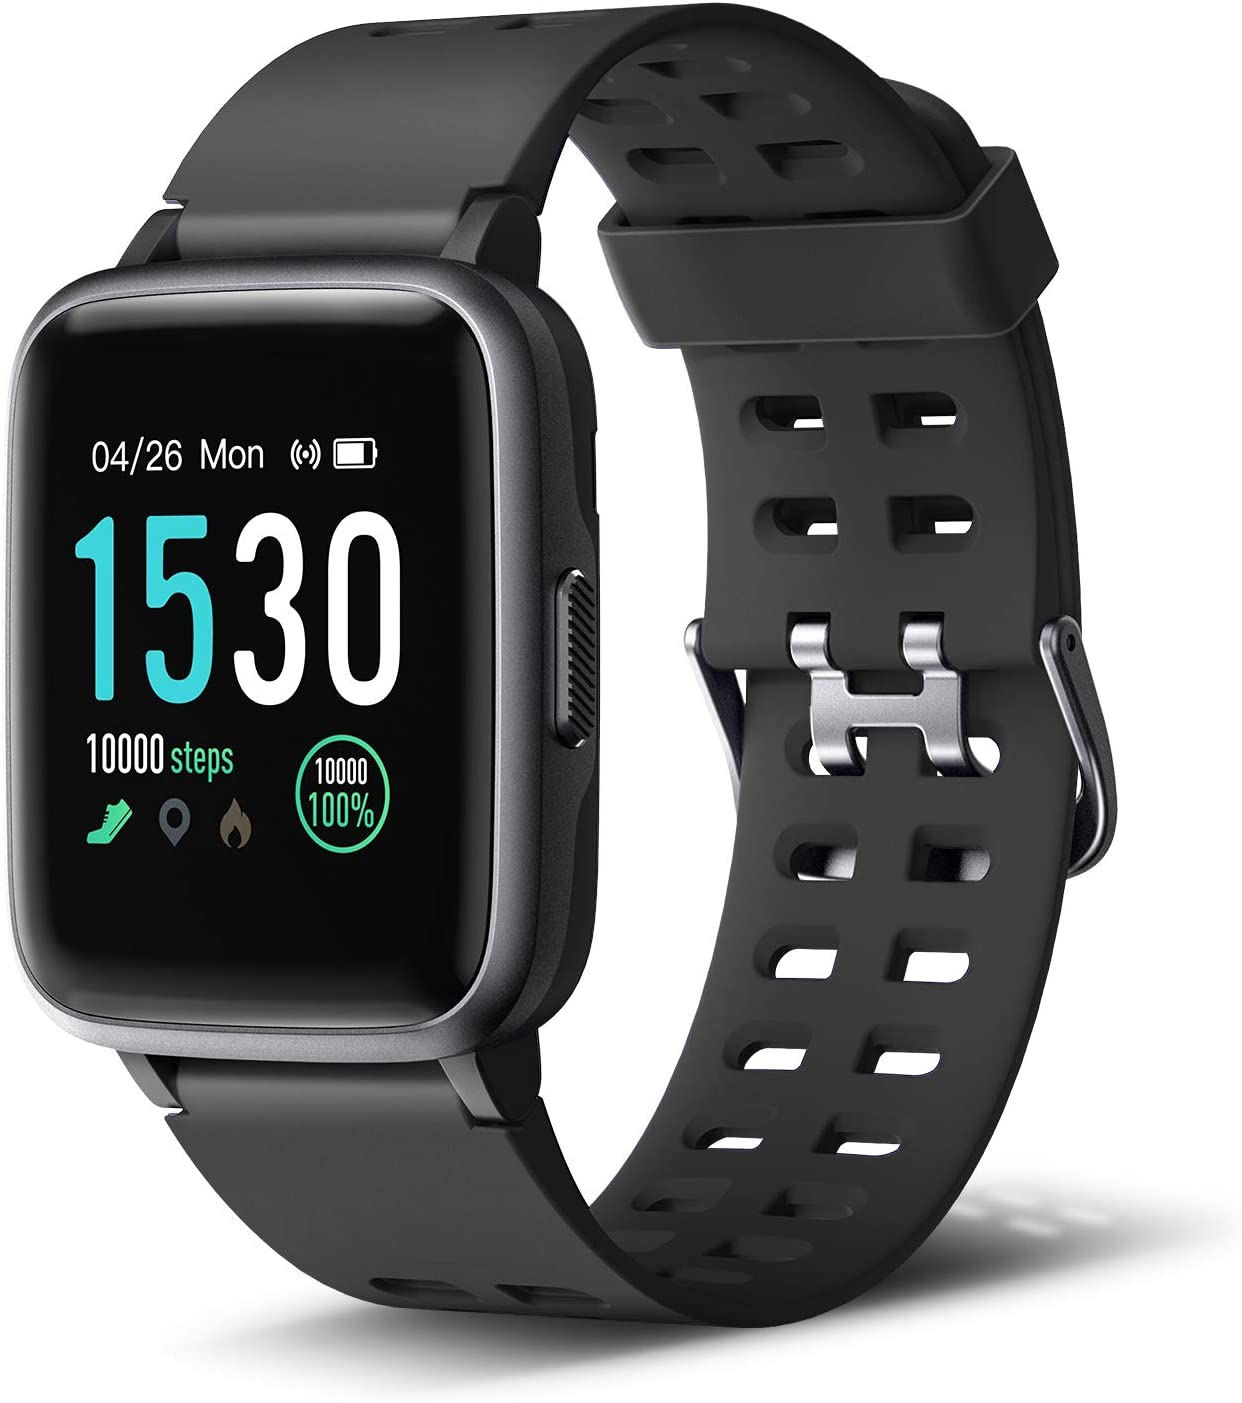 Letsfit Fitness Tracker HR, Activity Tracker with 1.3" Color Screen, 5ATM Waterproof  Smart Watch with Heart Rate Monitor Sleep Monitor Step Calorie Counter  Black : Amazon.co.uk: Sports & Outdoors